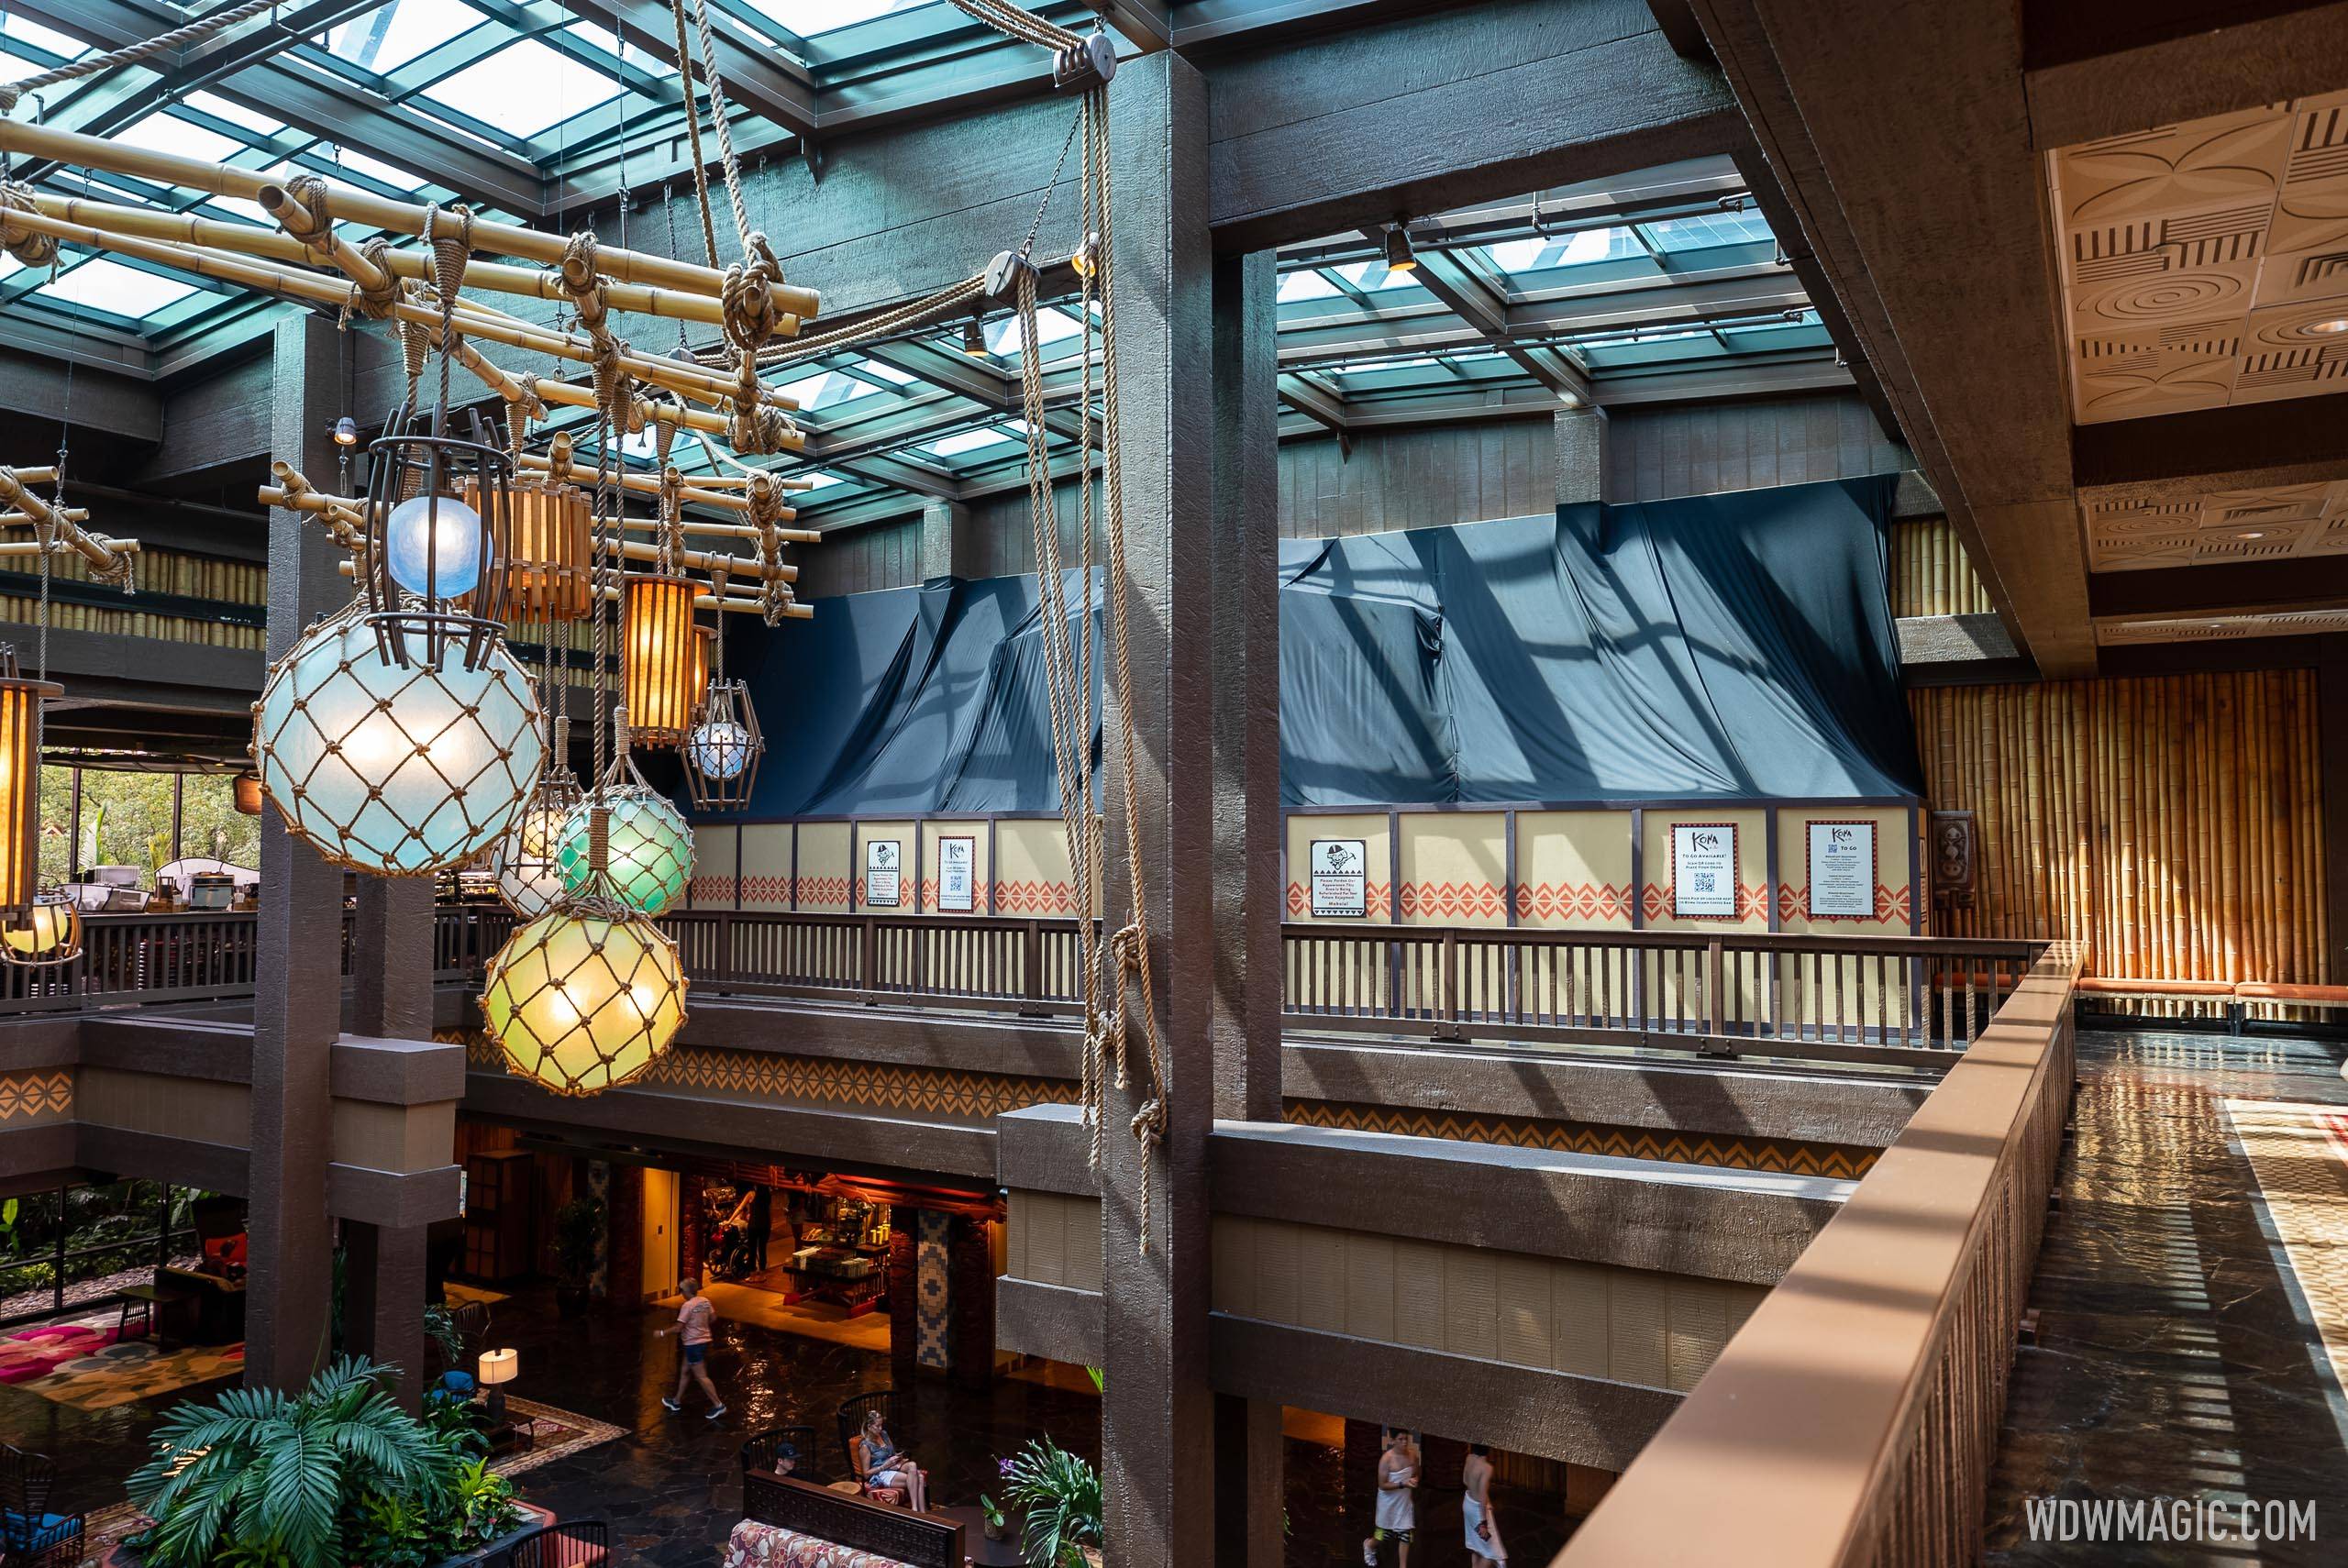 Reservations open for the refurbished Kona Cafe at Disney's Polynesian Village Resort